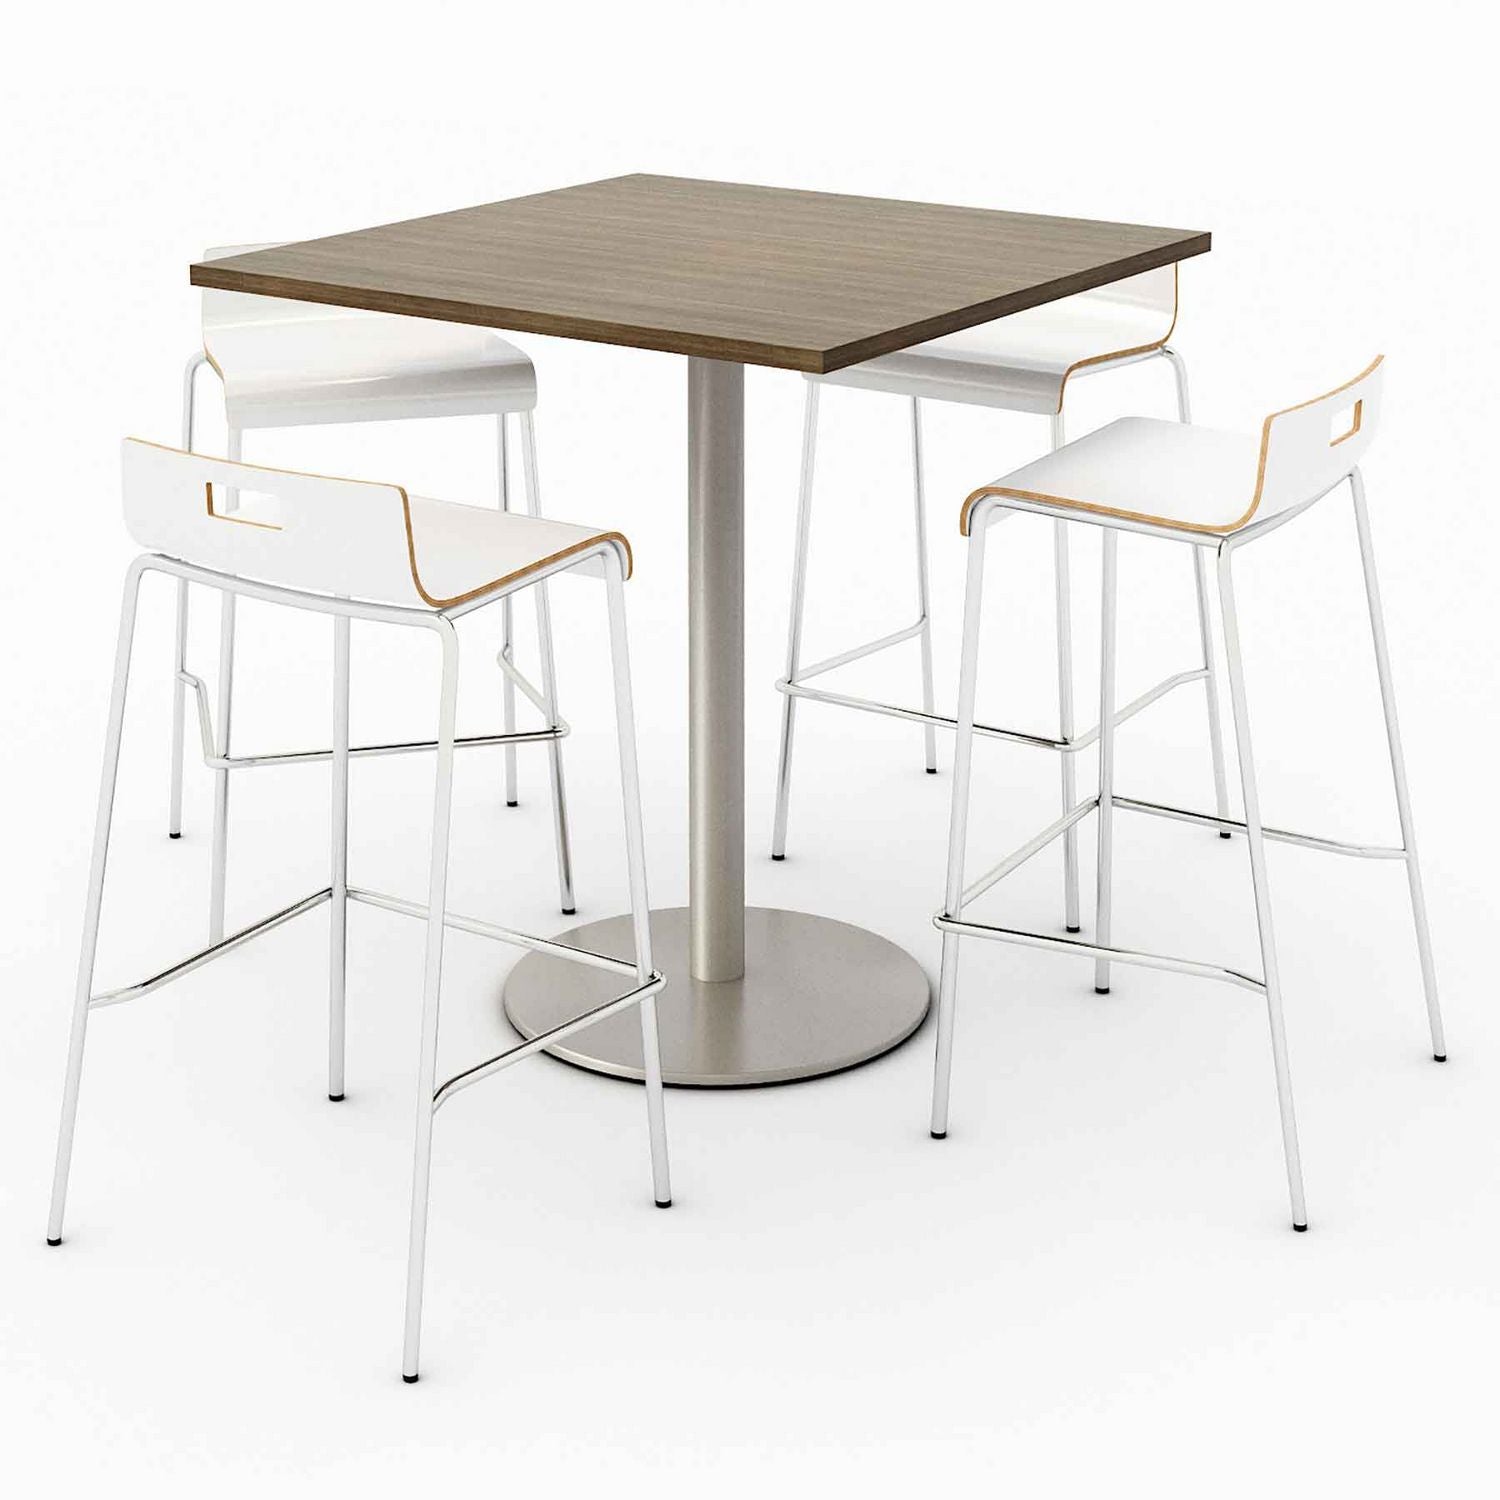 pedestal-bistro-table-with-four-white-jive-series-barstools-square-36-x-36-x-41-studio-teak-ships-in-4-6-business-days_kfi811774039932 - 1